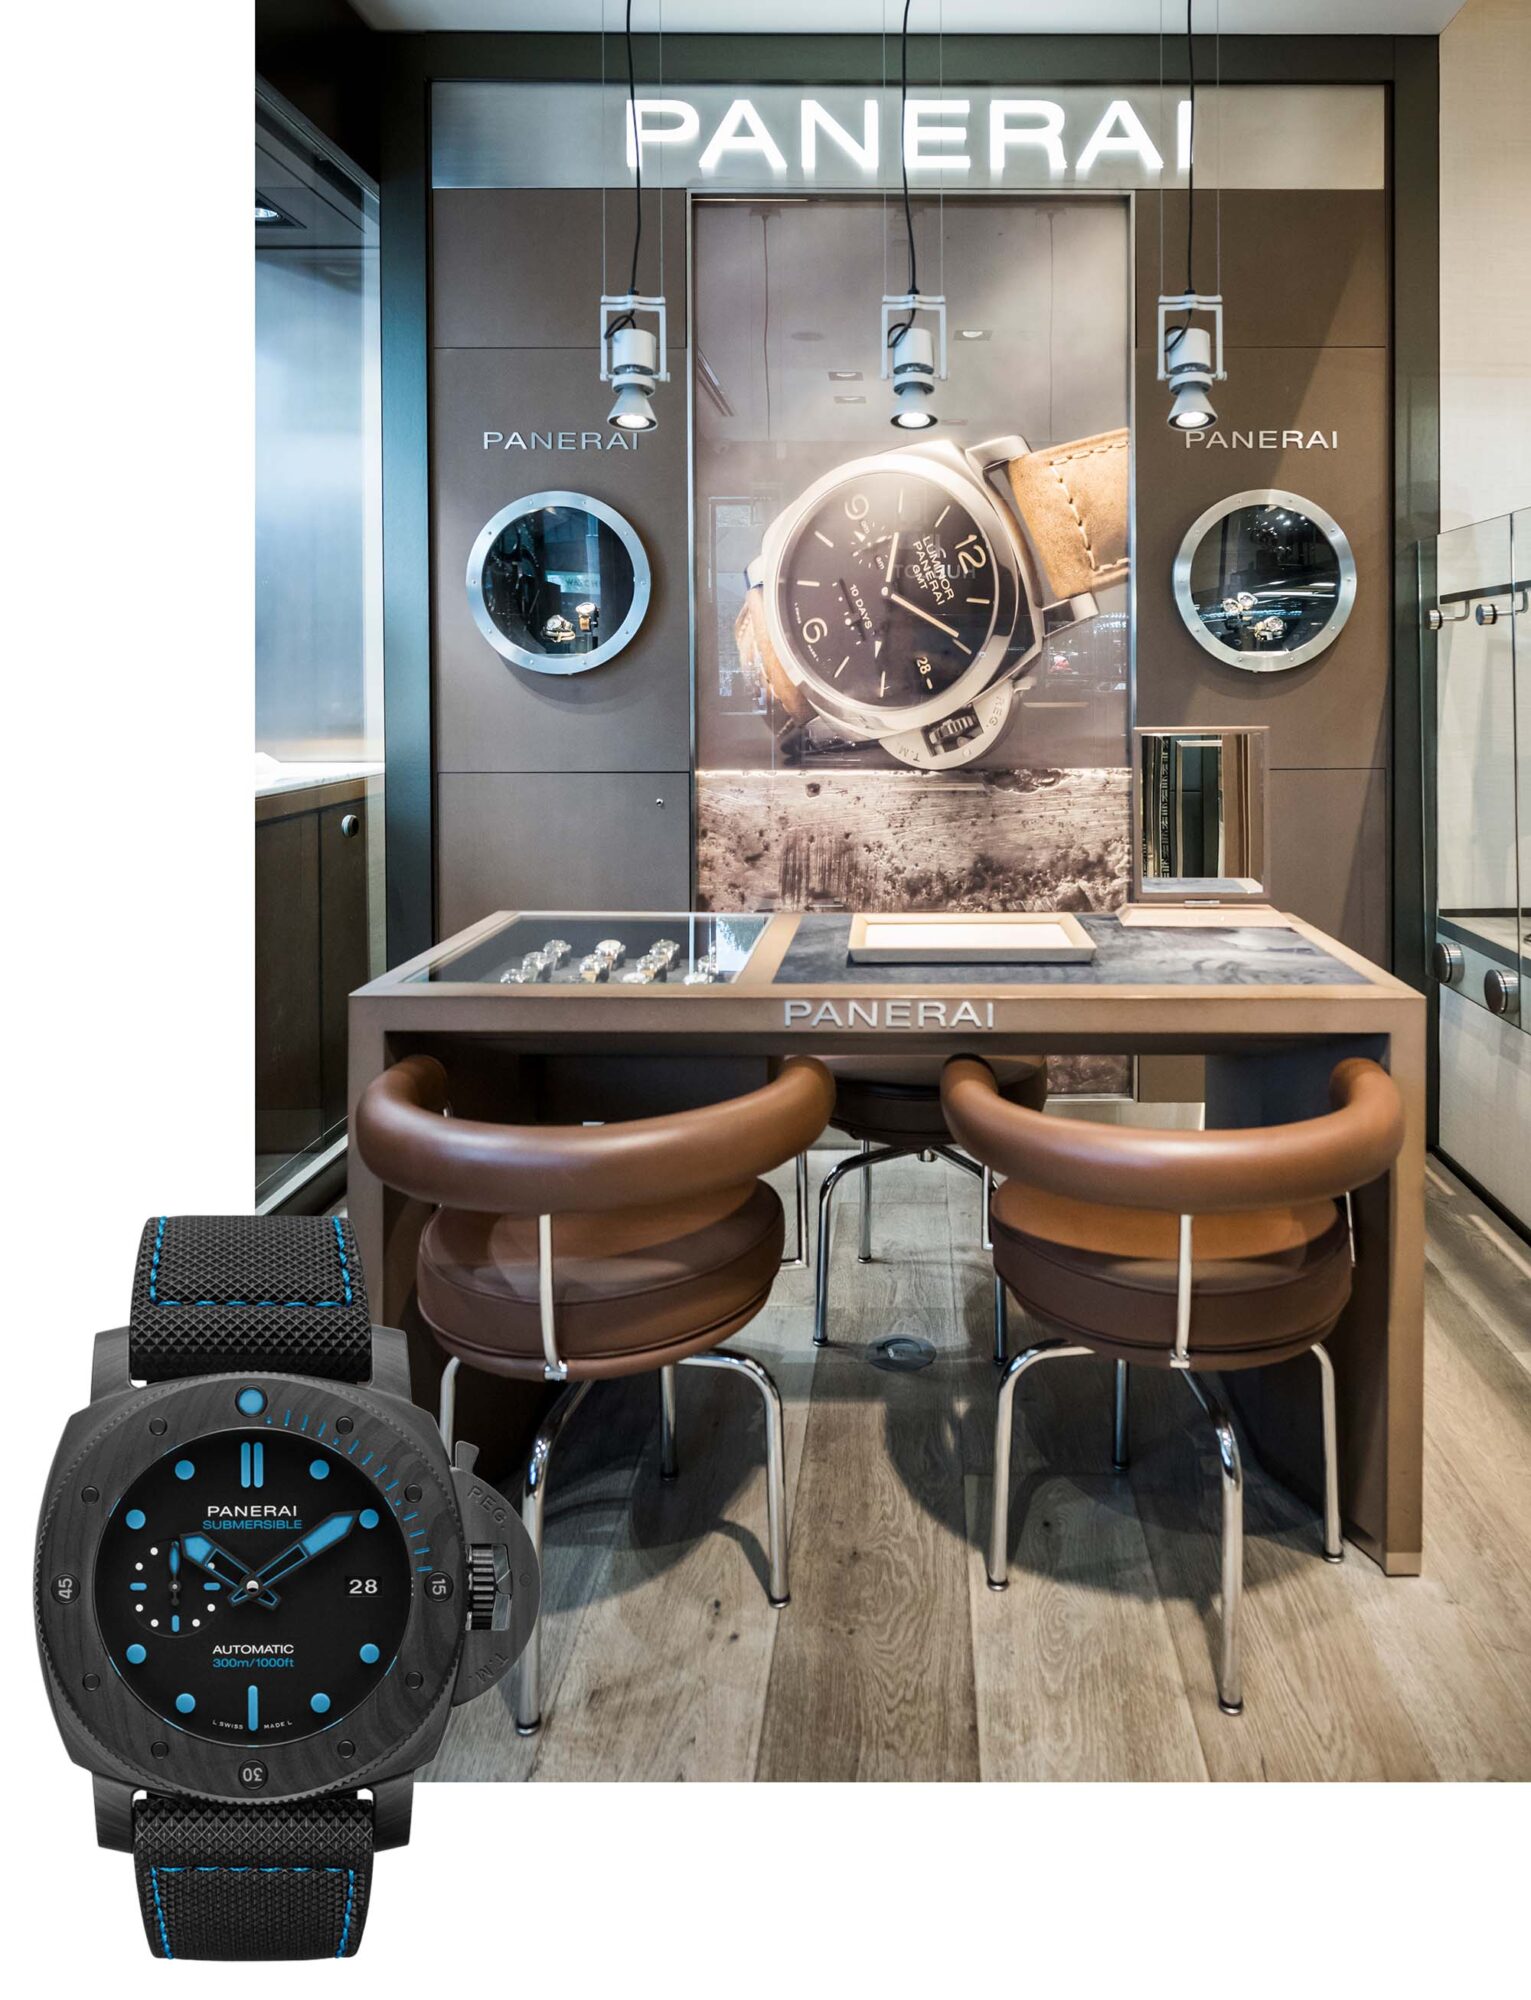 Shop Panerai Watches in Australia at our Sydney and Perth boutiques.